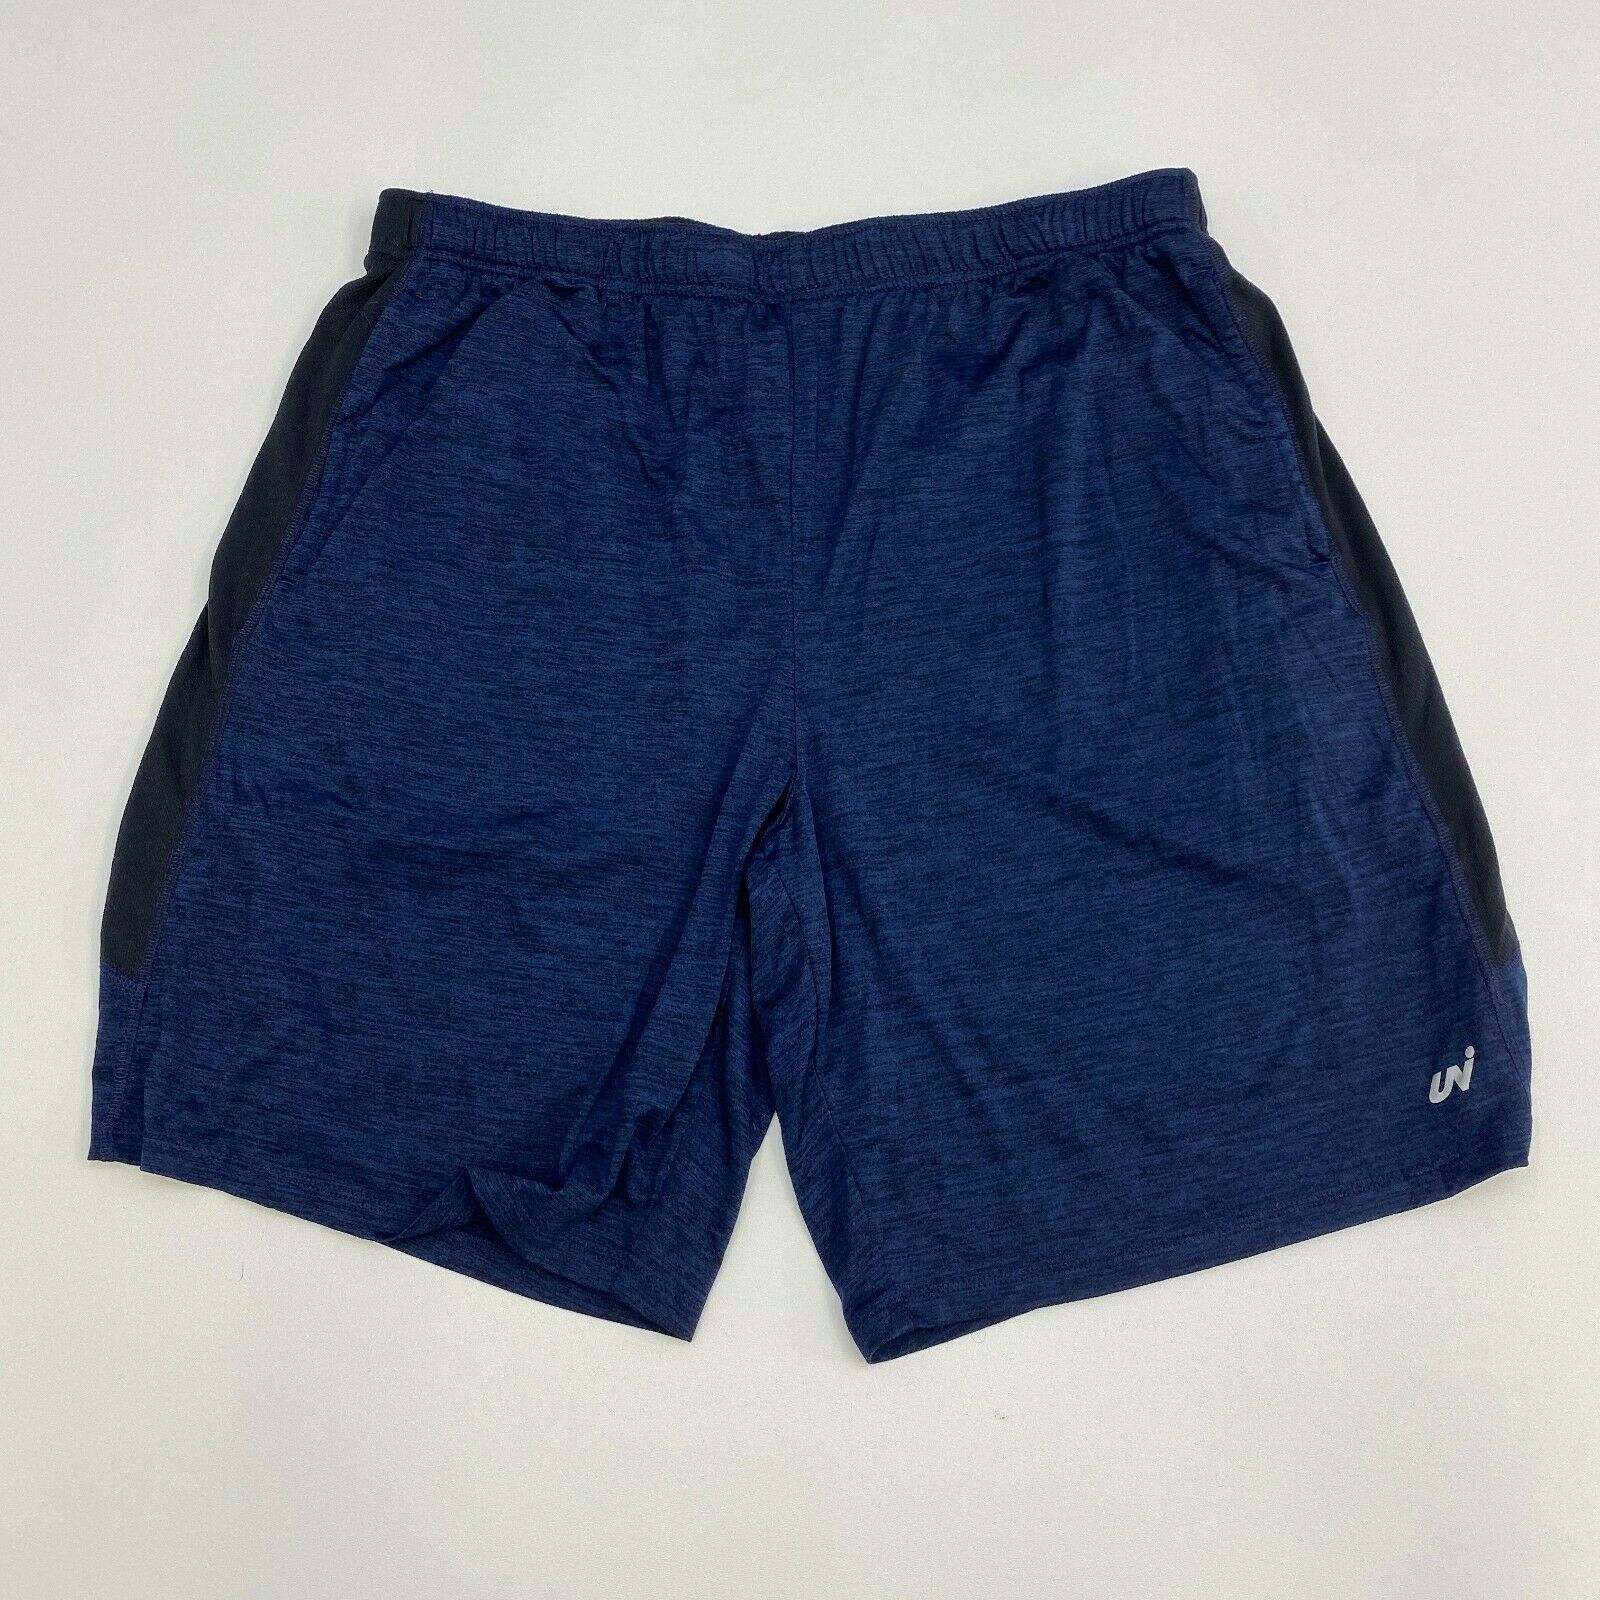 Unipro Athletic Shorts Mens XXL Qwick Dry Blue Casual Workout - Shorts